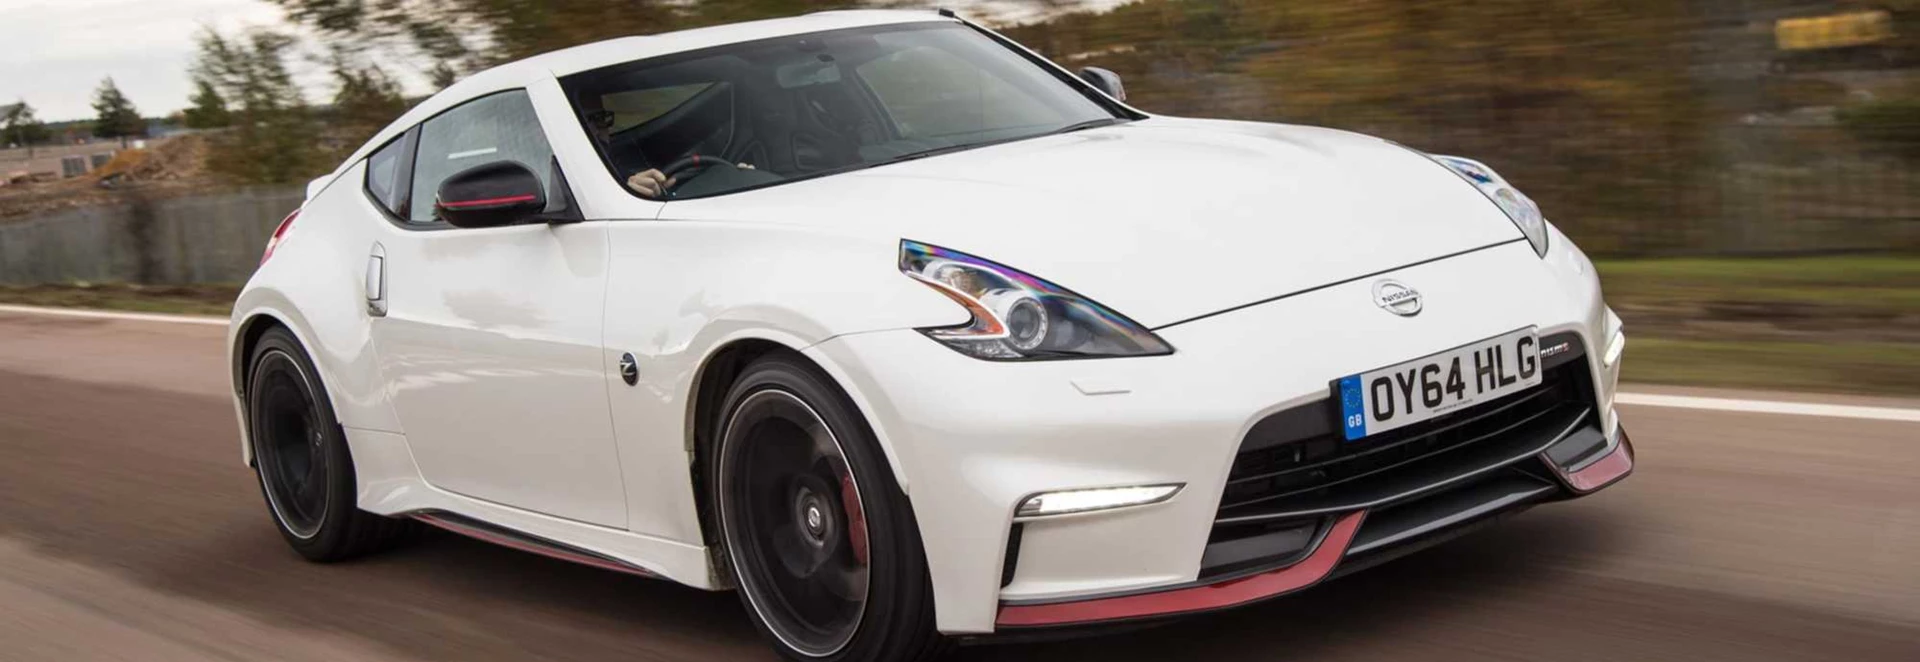 Nissan 370Z Coupe review 